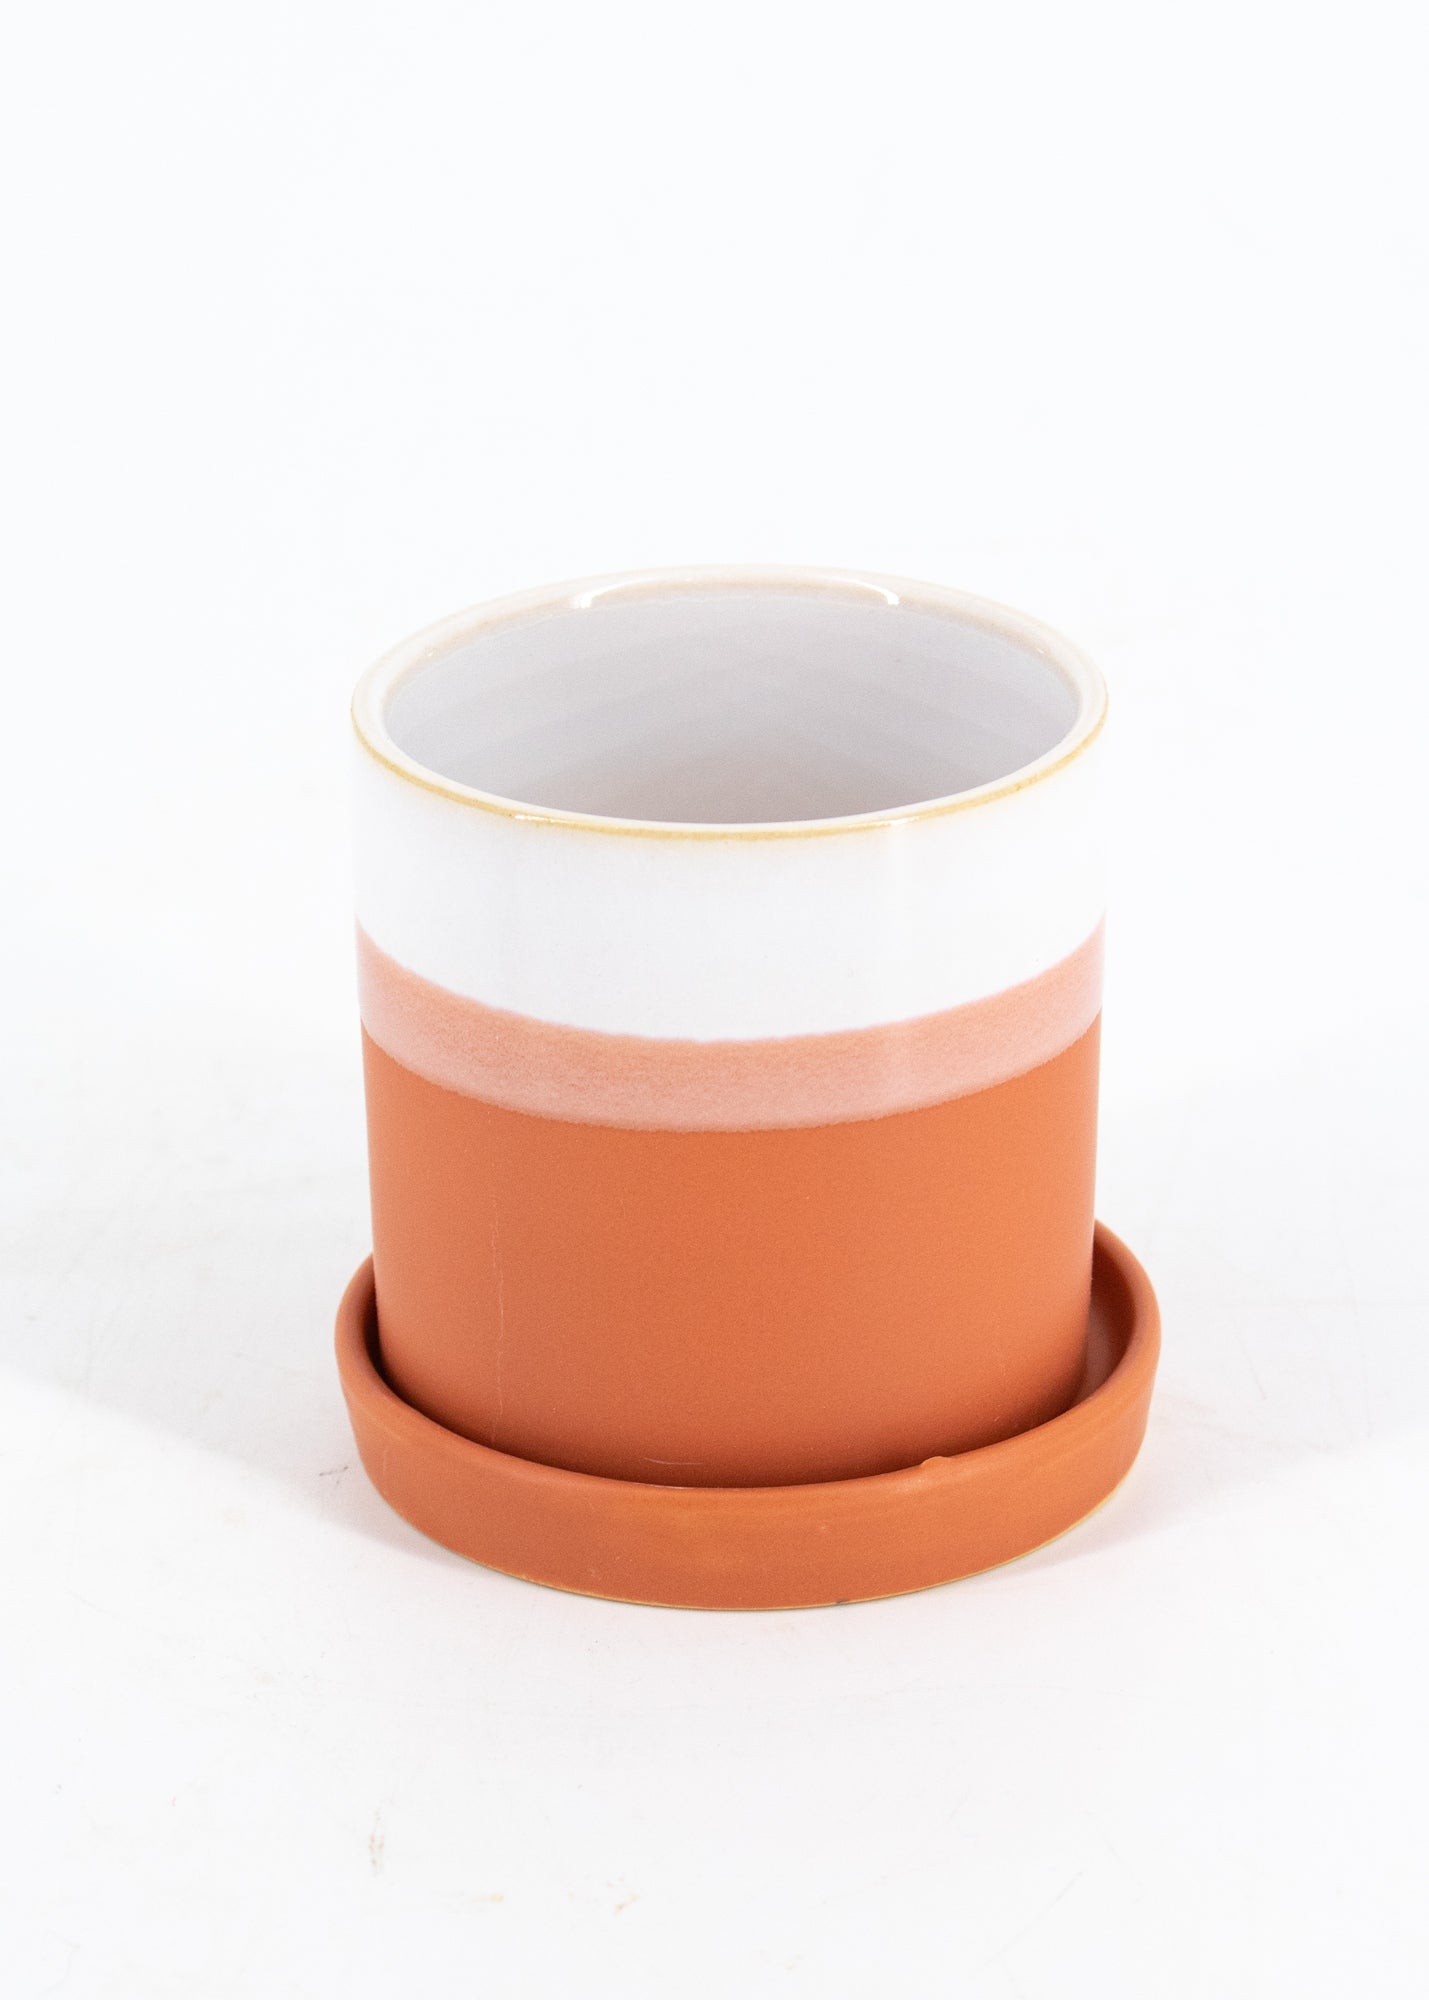 Terra Cotta Stripe Pot with Saucer (4 Sizes Available) -  - Pots and Vases - Wild Lark